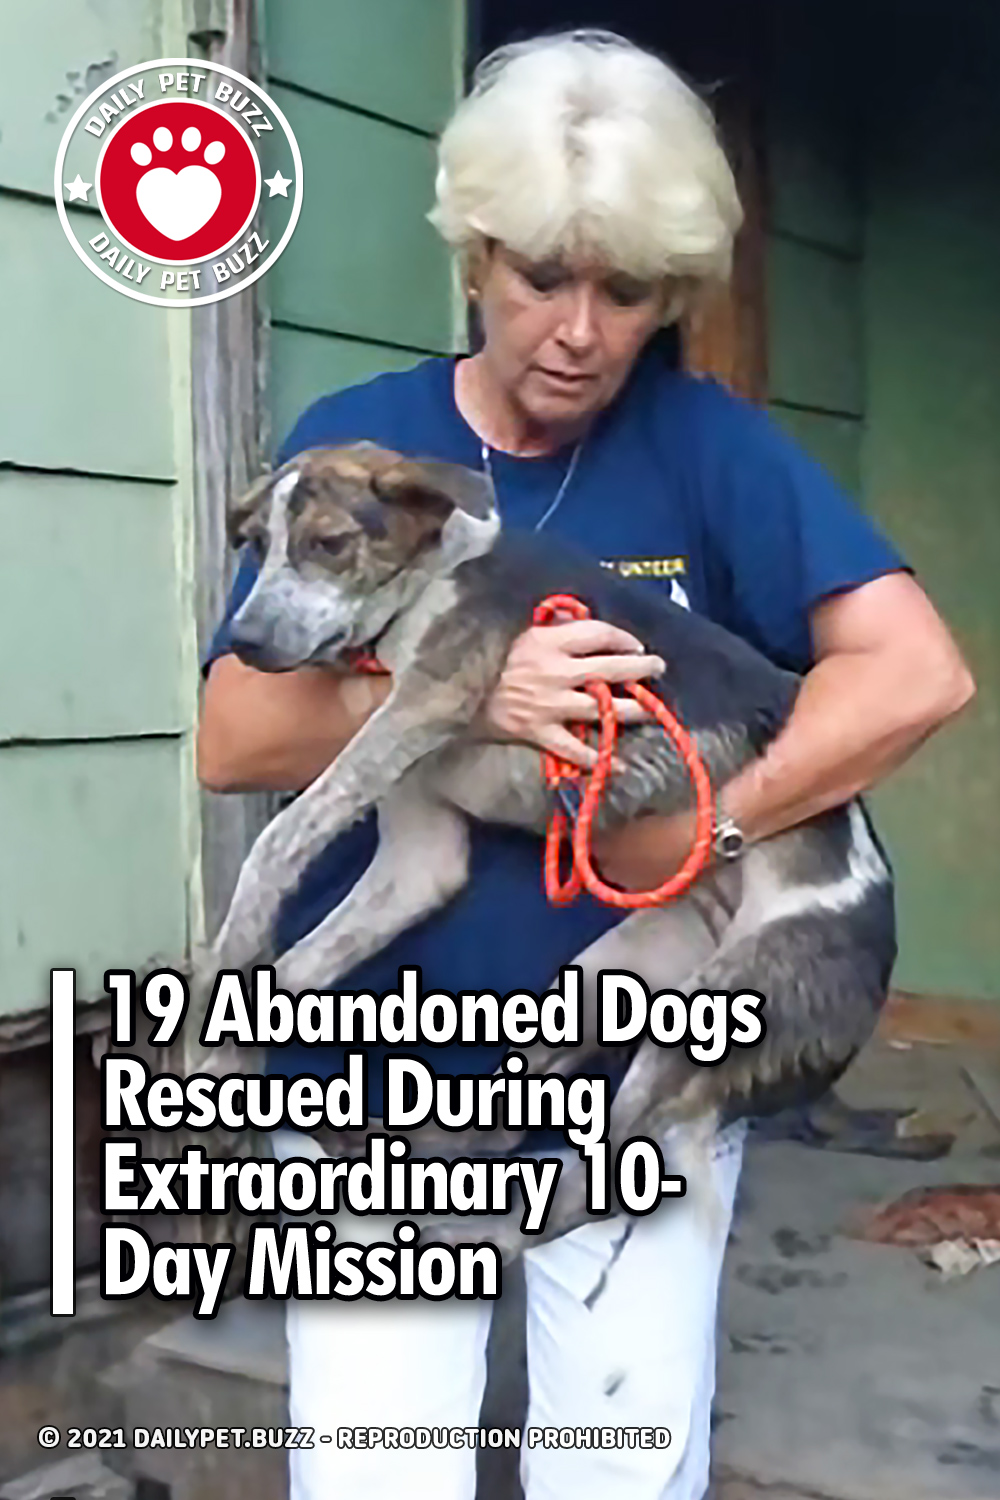 19 Abandoned Dogs Rescued During Extraordinary 10-Day Mission